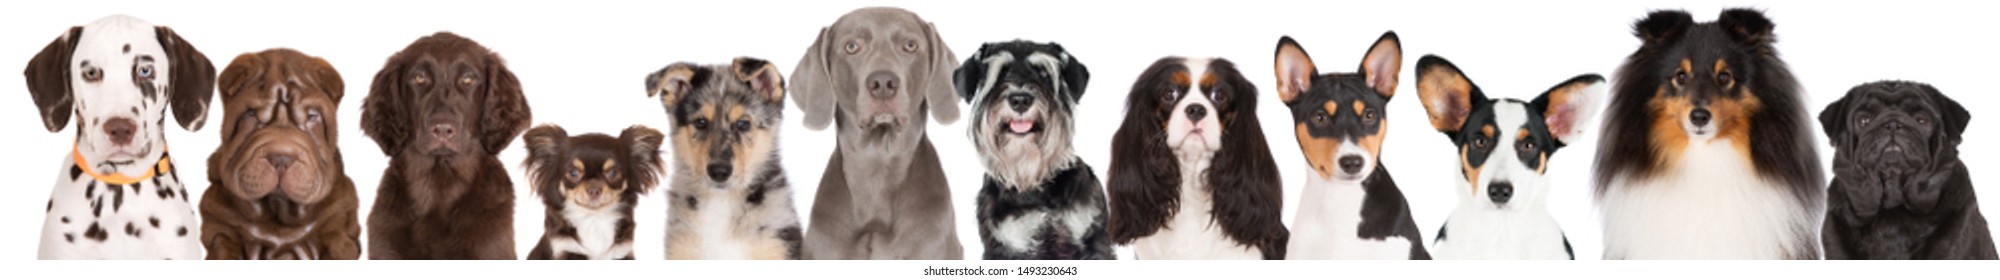 group of dogs portrait on white background - Shutterstock ID 1493230643